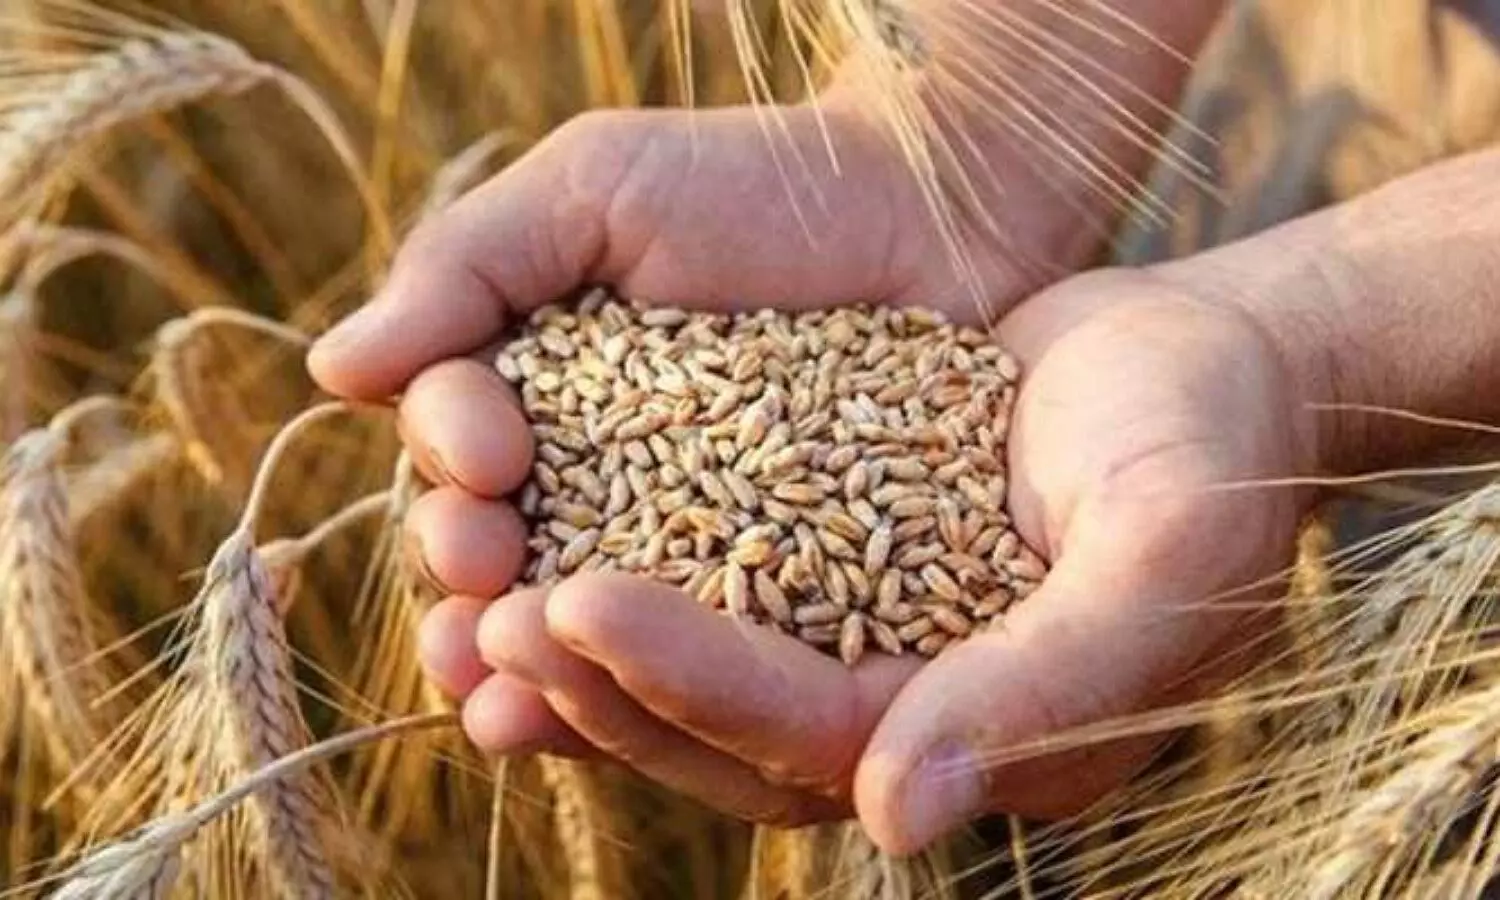 India imposed restrictions on wheat export